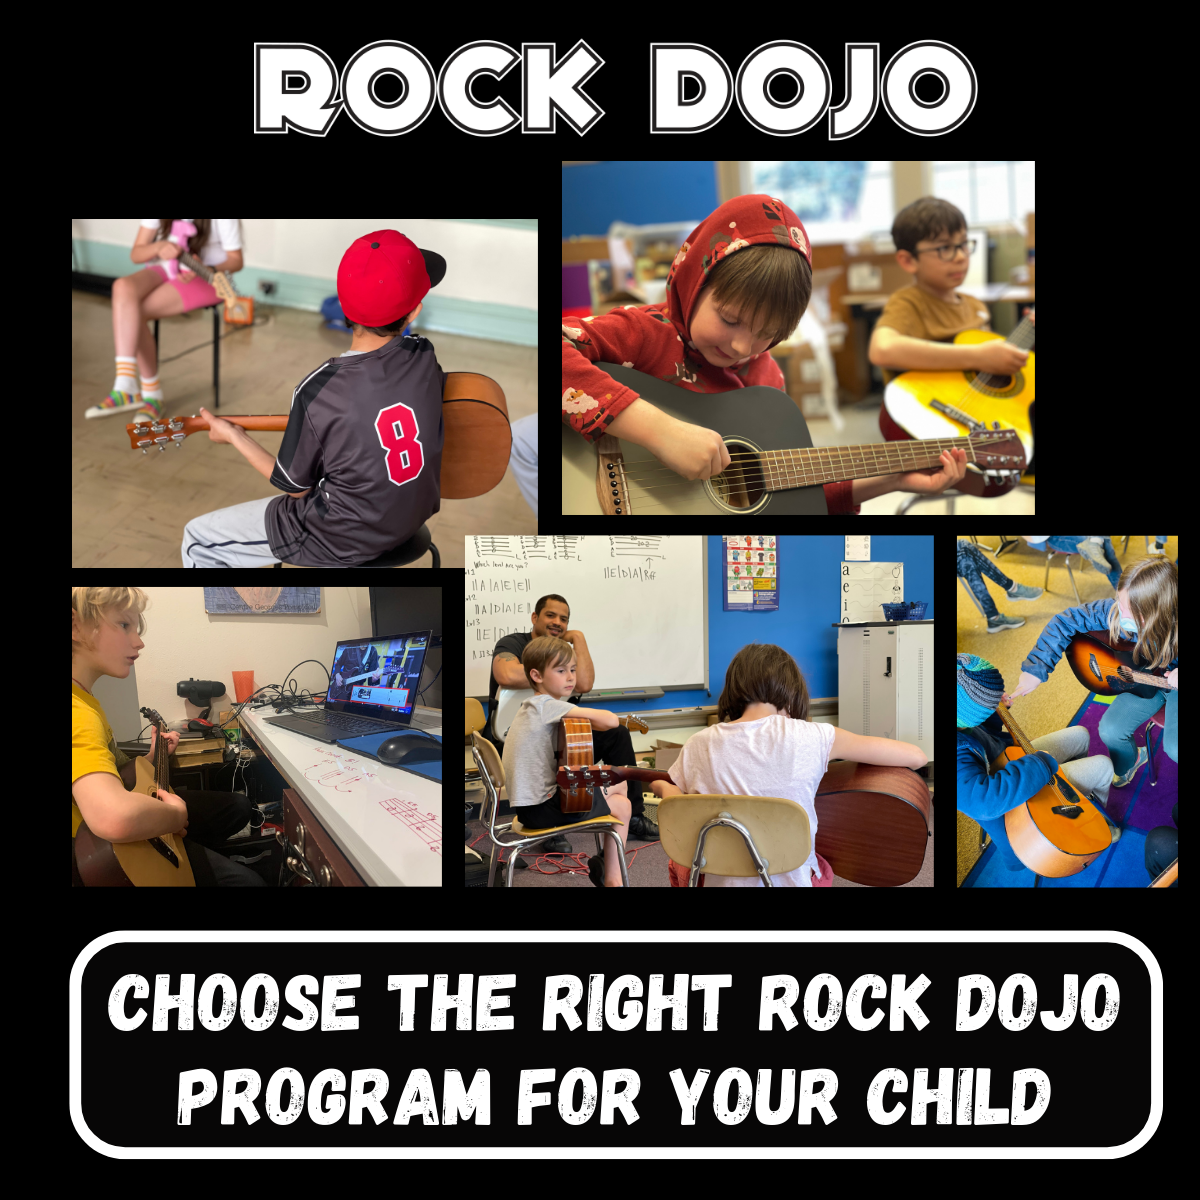 This image helps the parents choose the right Rock Dojo program for their child.